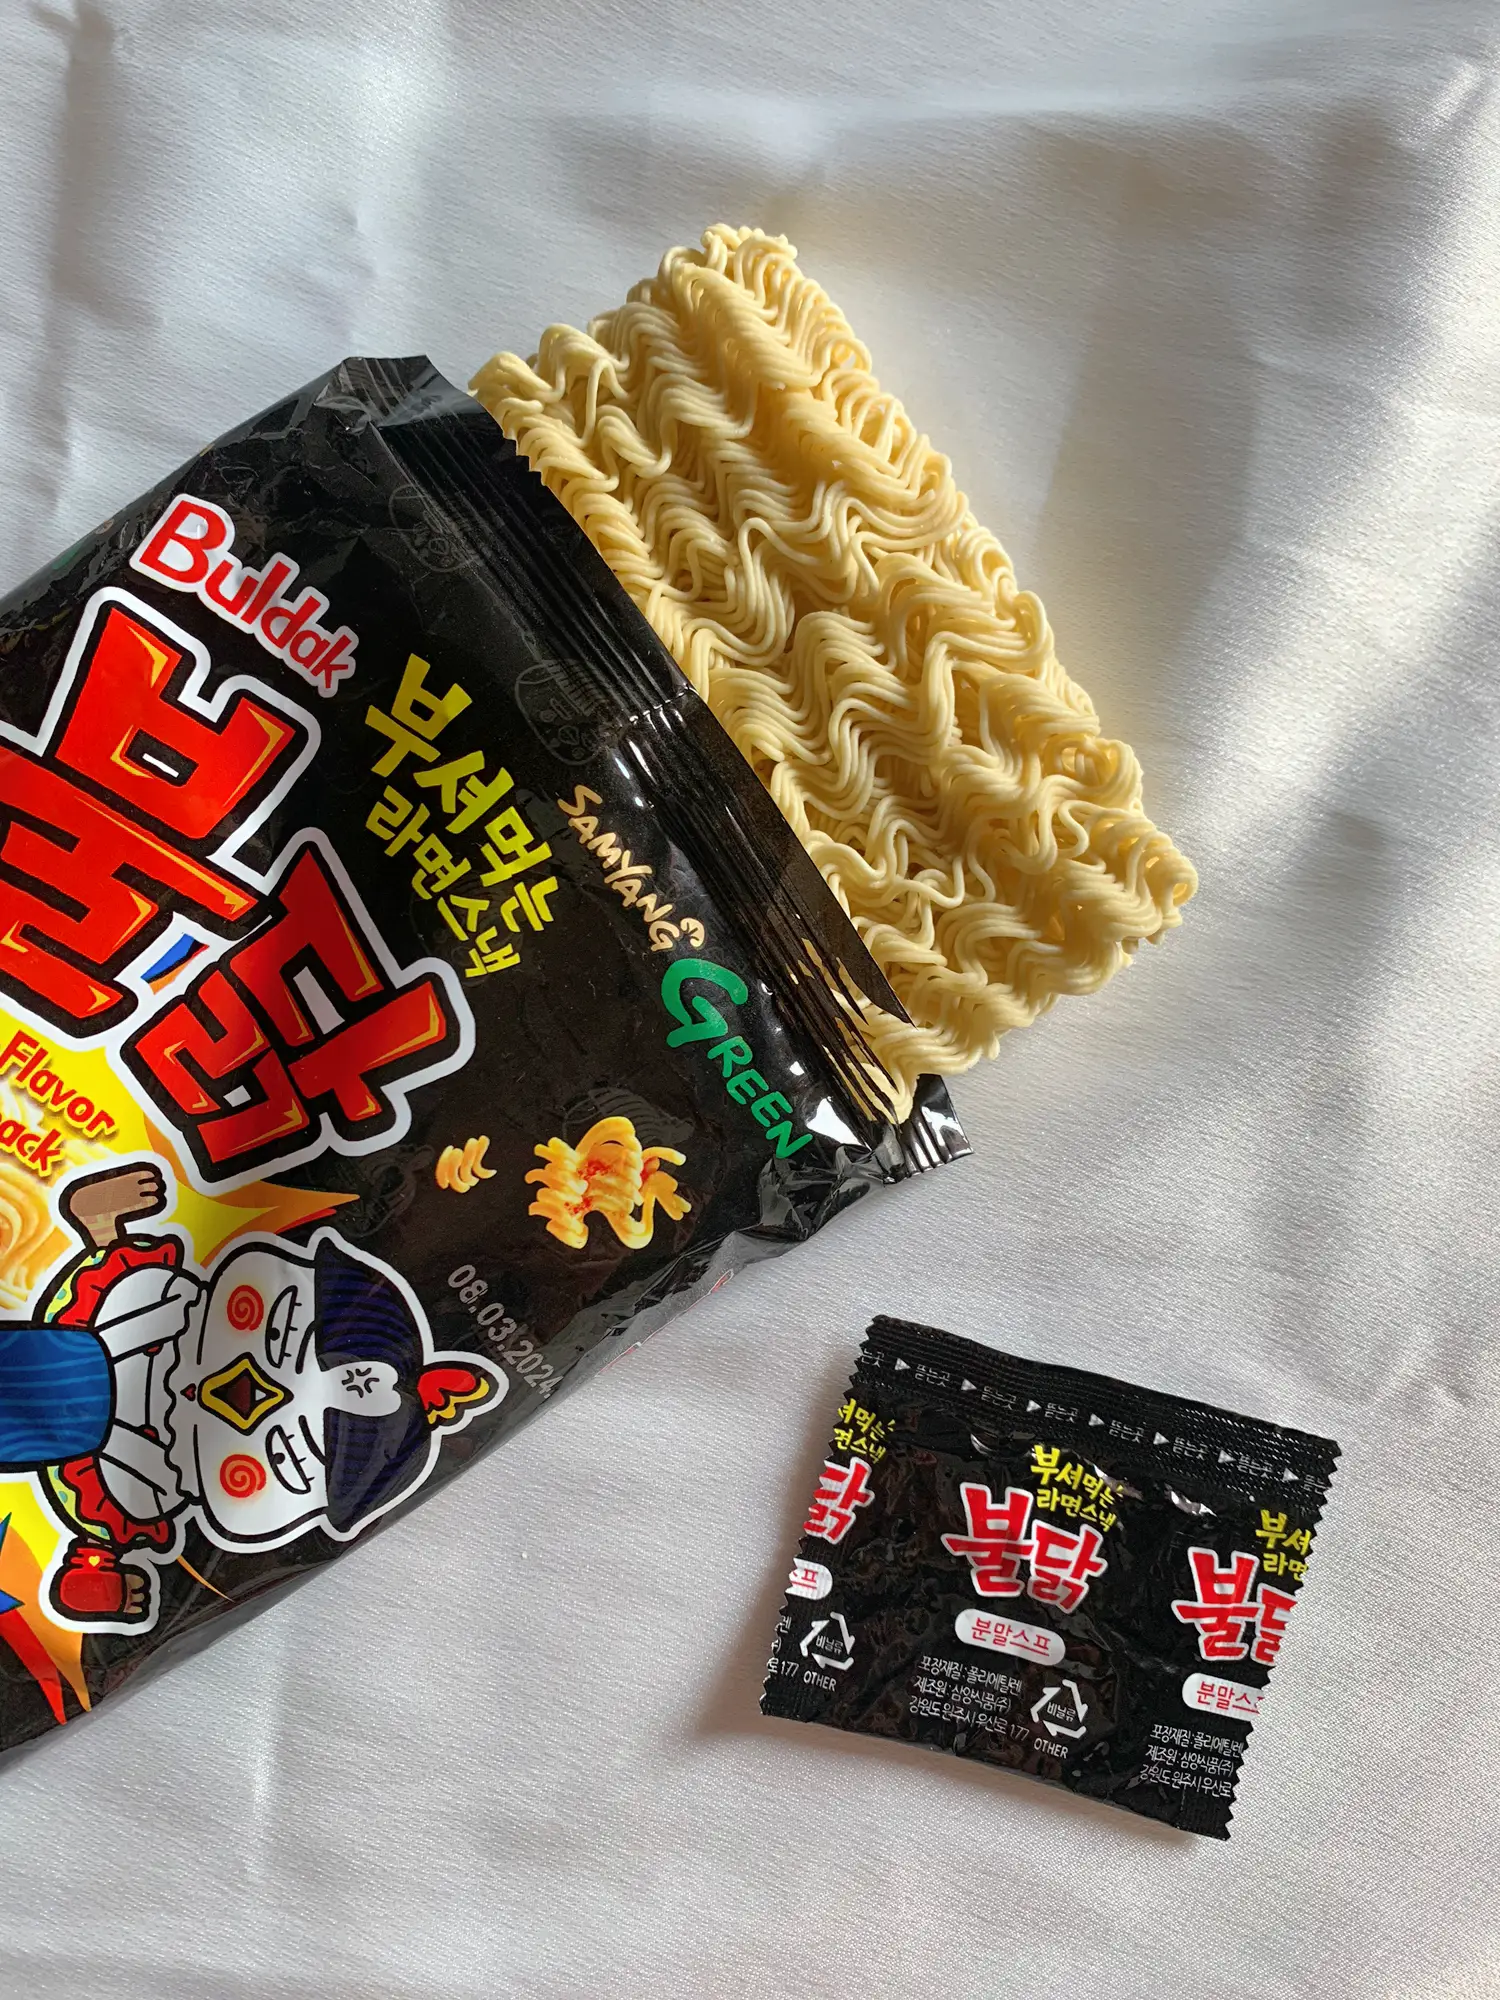 Review Samyang ramen snack: crunchy and spicy!, Gallery posted by juli ss